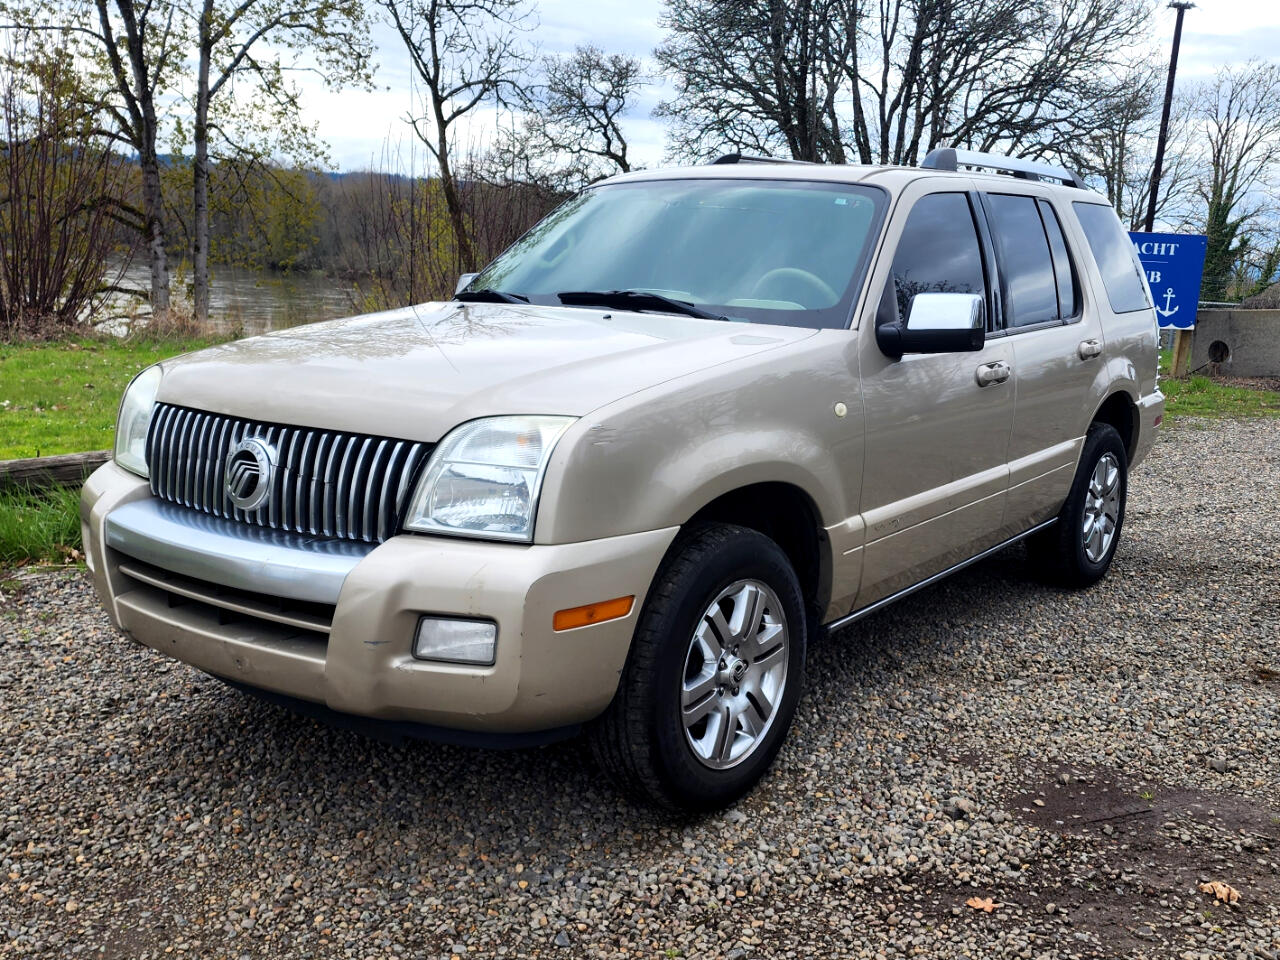 Used 2007 Mercury Mountaineer Premier 4.6L AWD for Sale in Salem OR 97304  Edgewater Auto Center LLC